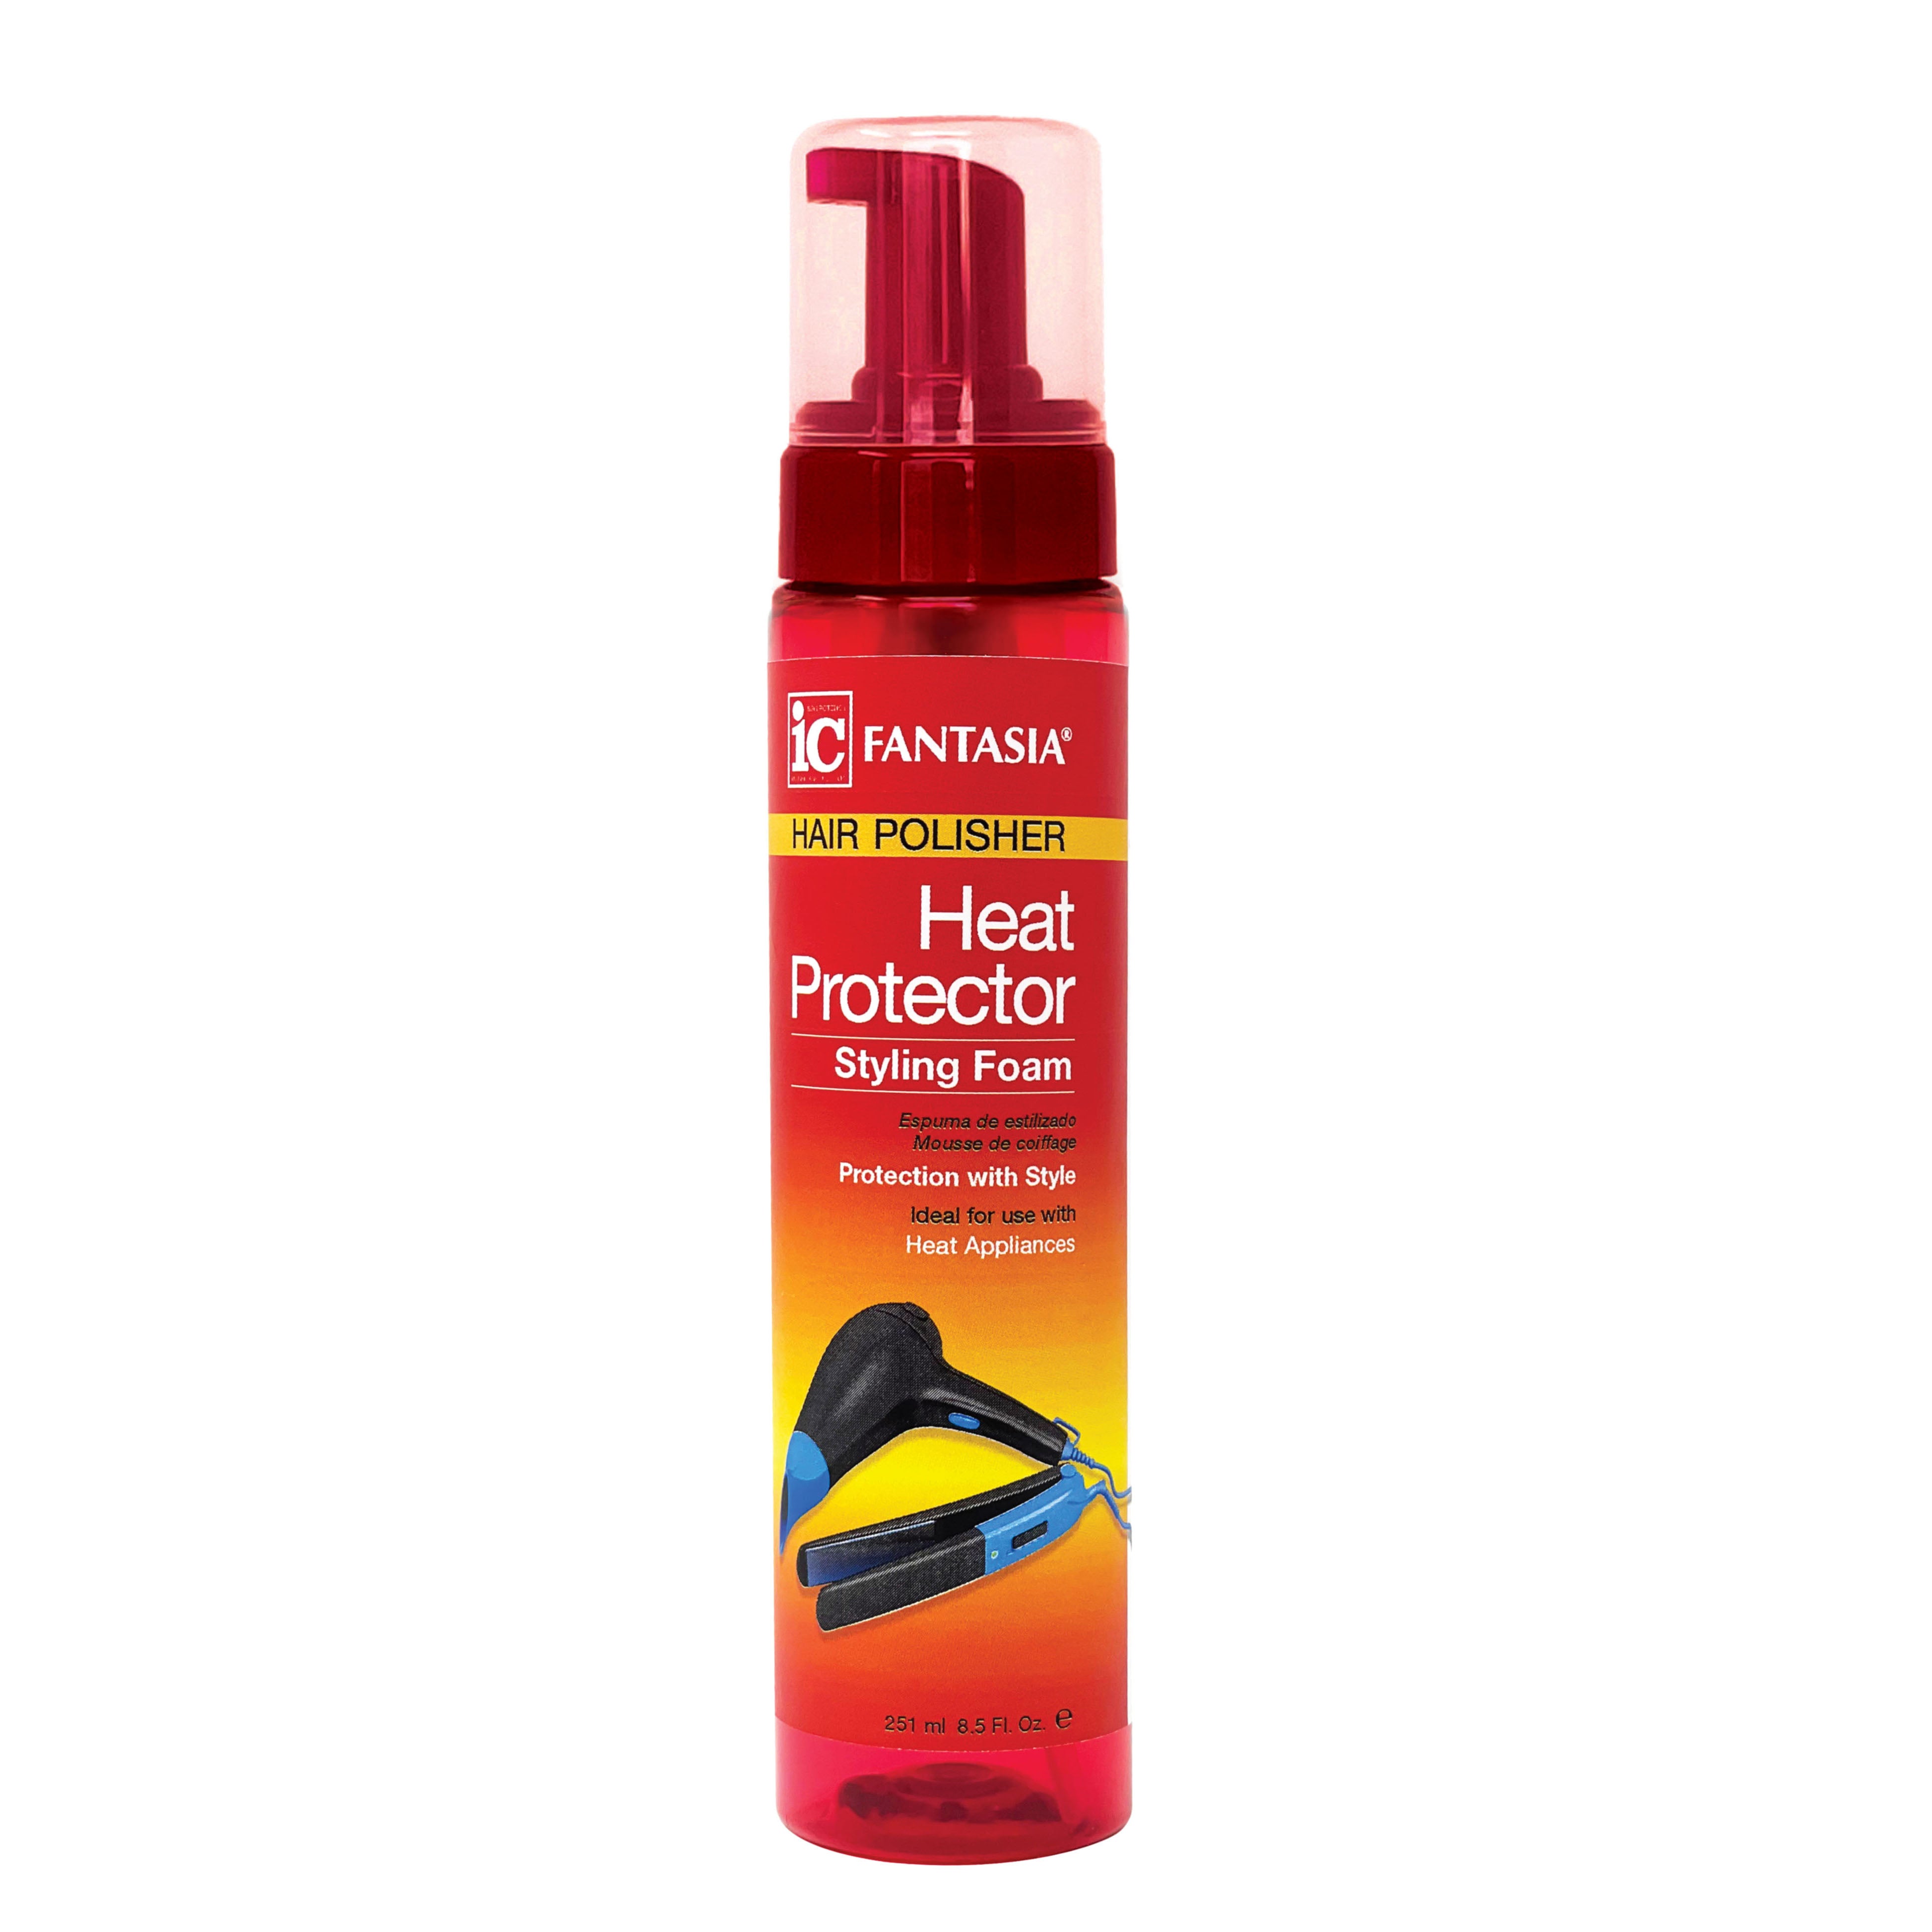 HEAT PROTECTOR STYLING FOAM (8.5 Hair Care Industries Fantasia – OZ) NEW! 